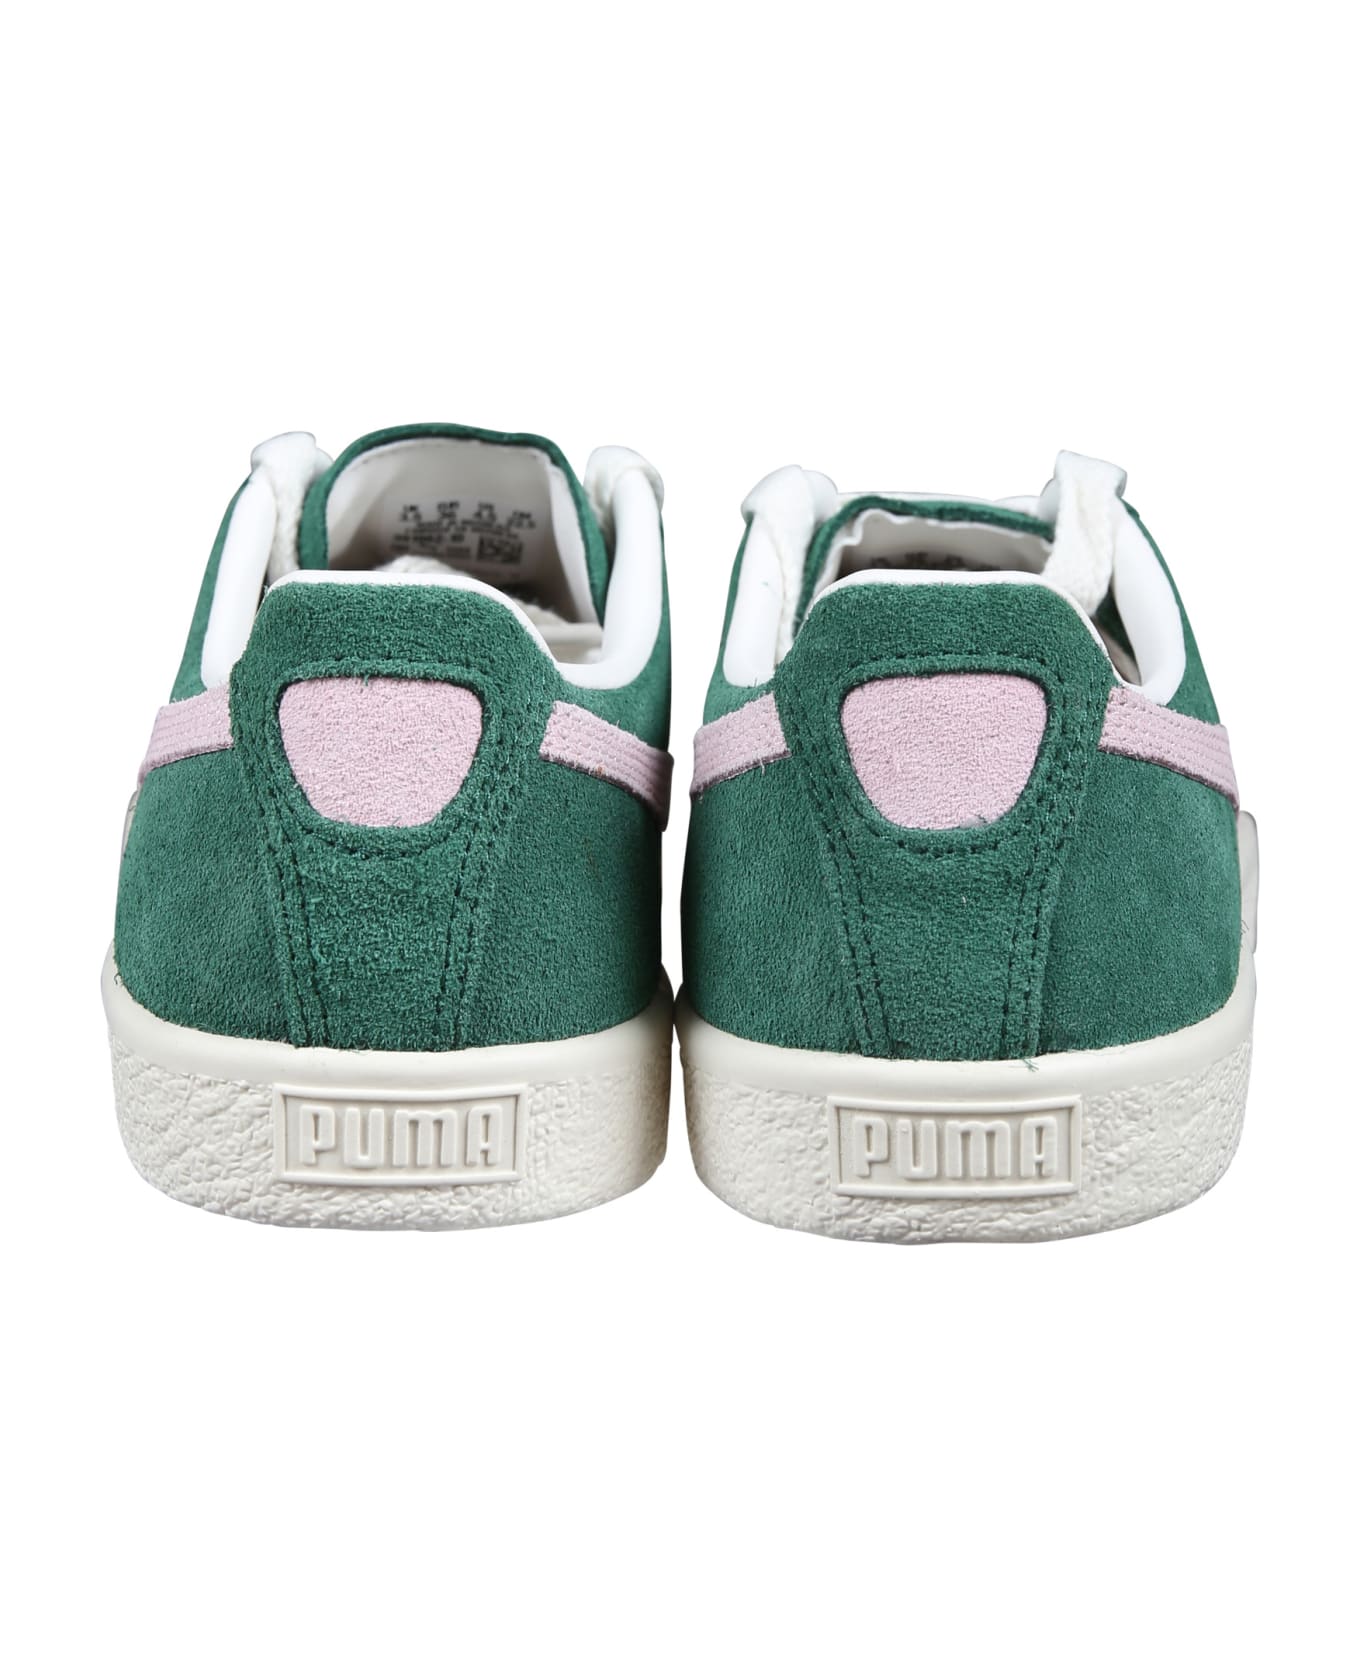 Puma Green Clyde Sneakers For Kids With Logo - Green